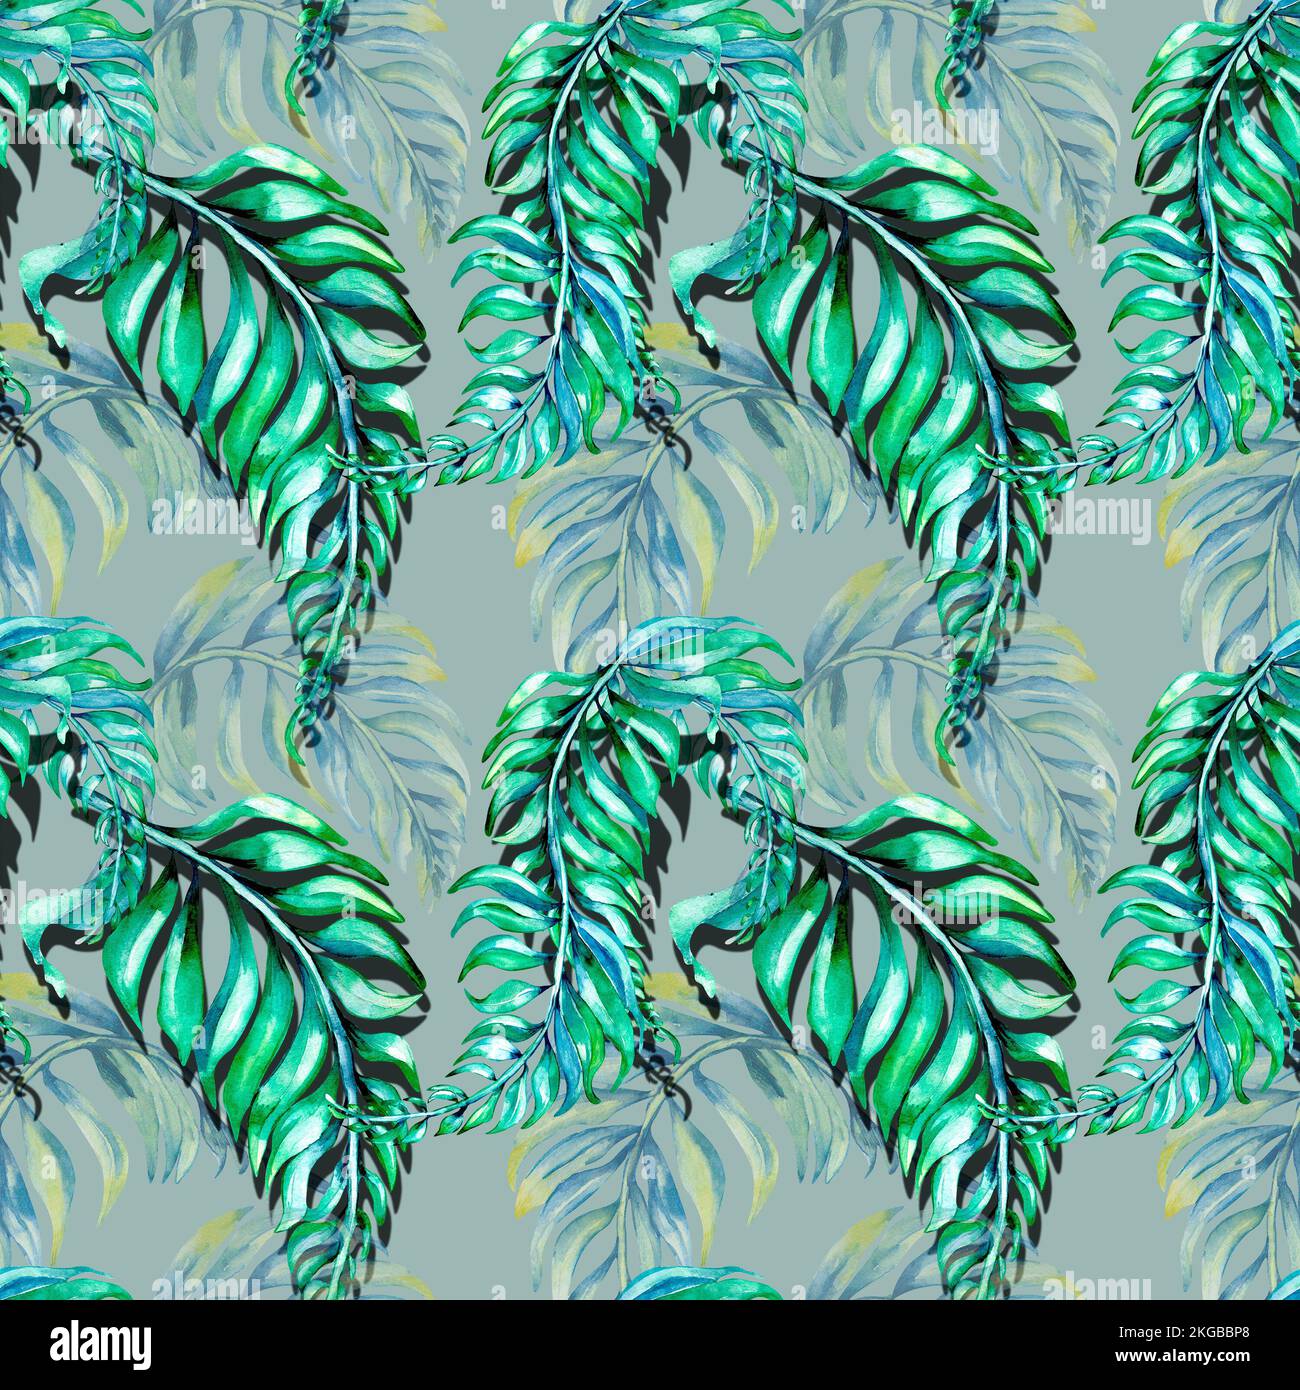 Jungle floral ornate seamless pattern watercolor illustration on blue . Palm leaves print. Exotic tropical plants, vintage print for design fabric, te Stock Photo